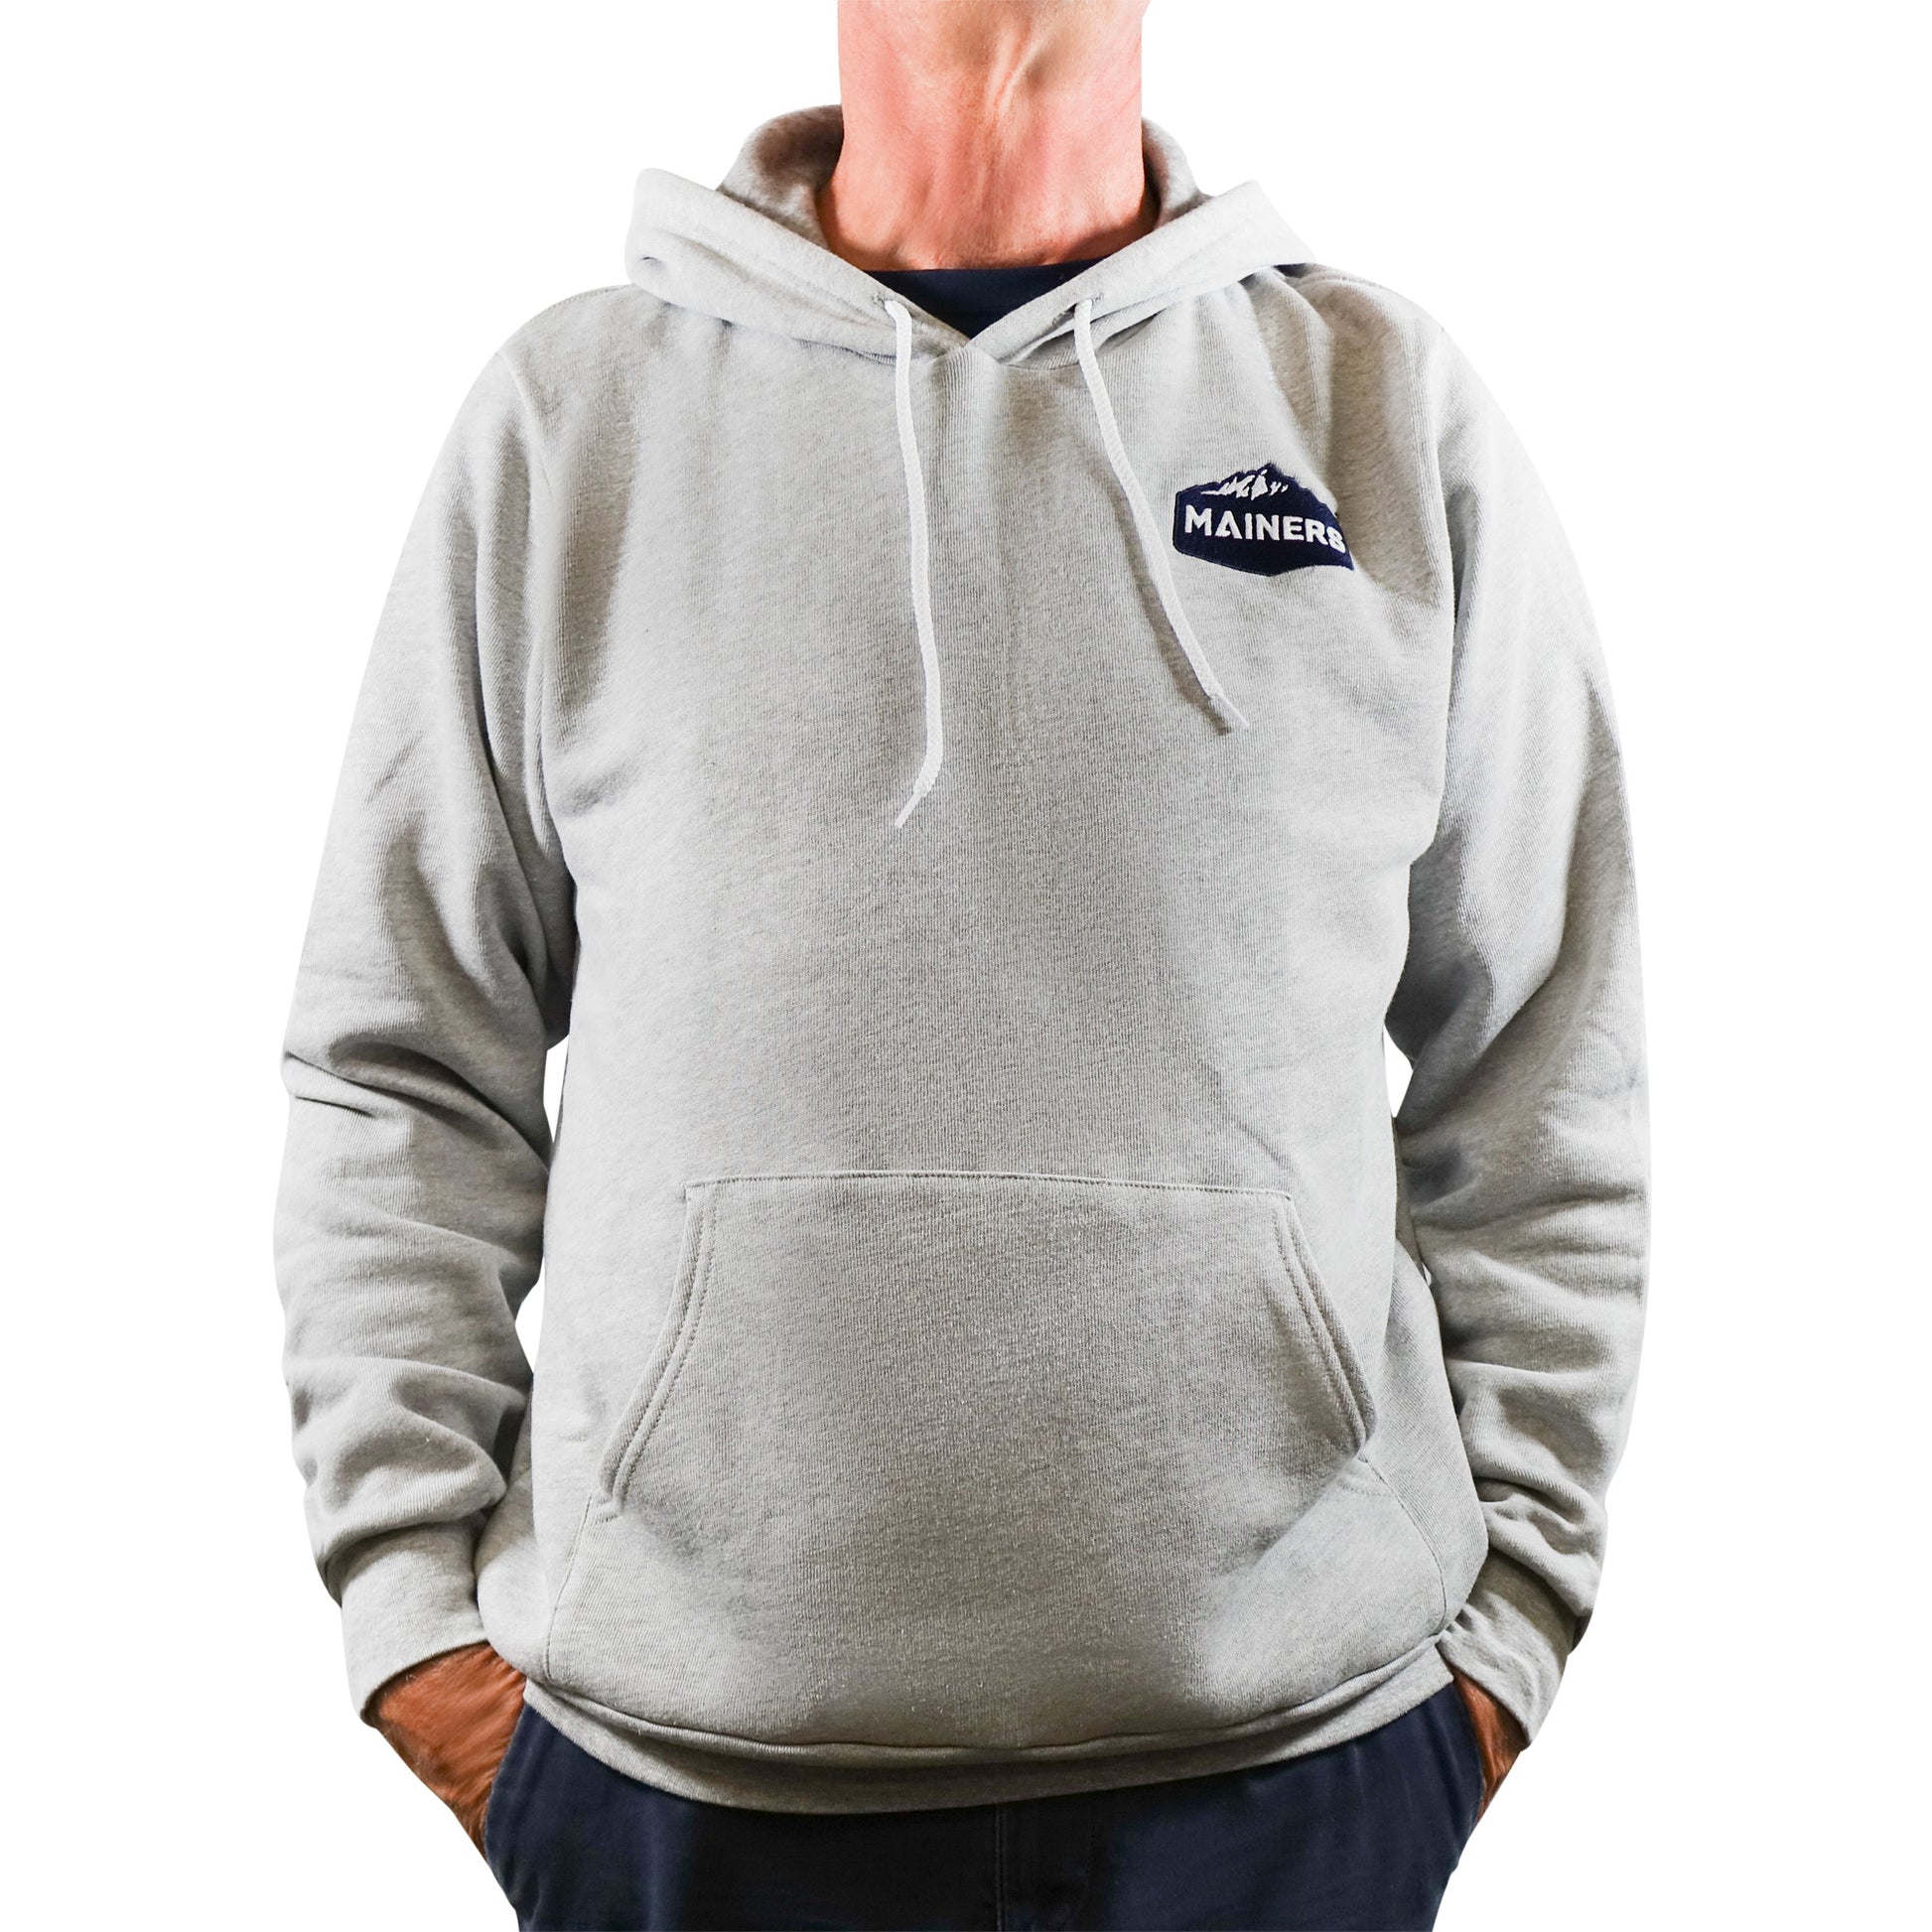 A man in a soft, grey Mainers Hoodie by Mainers.